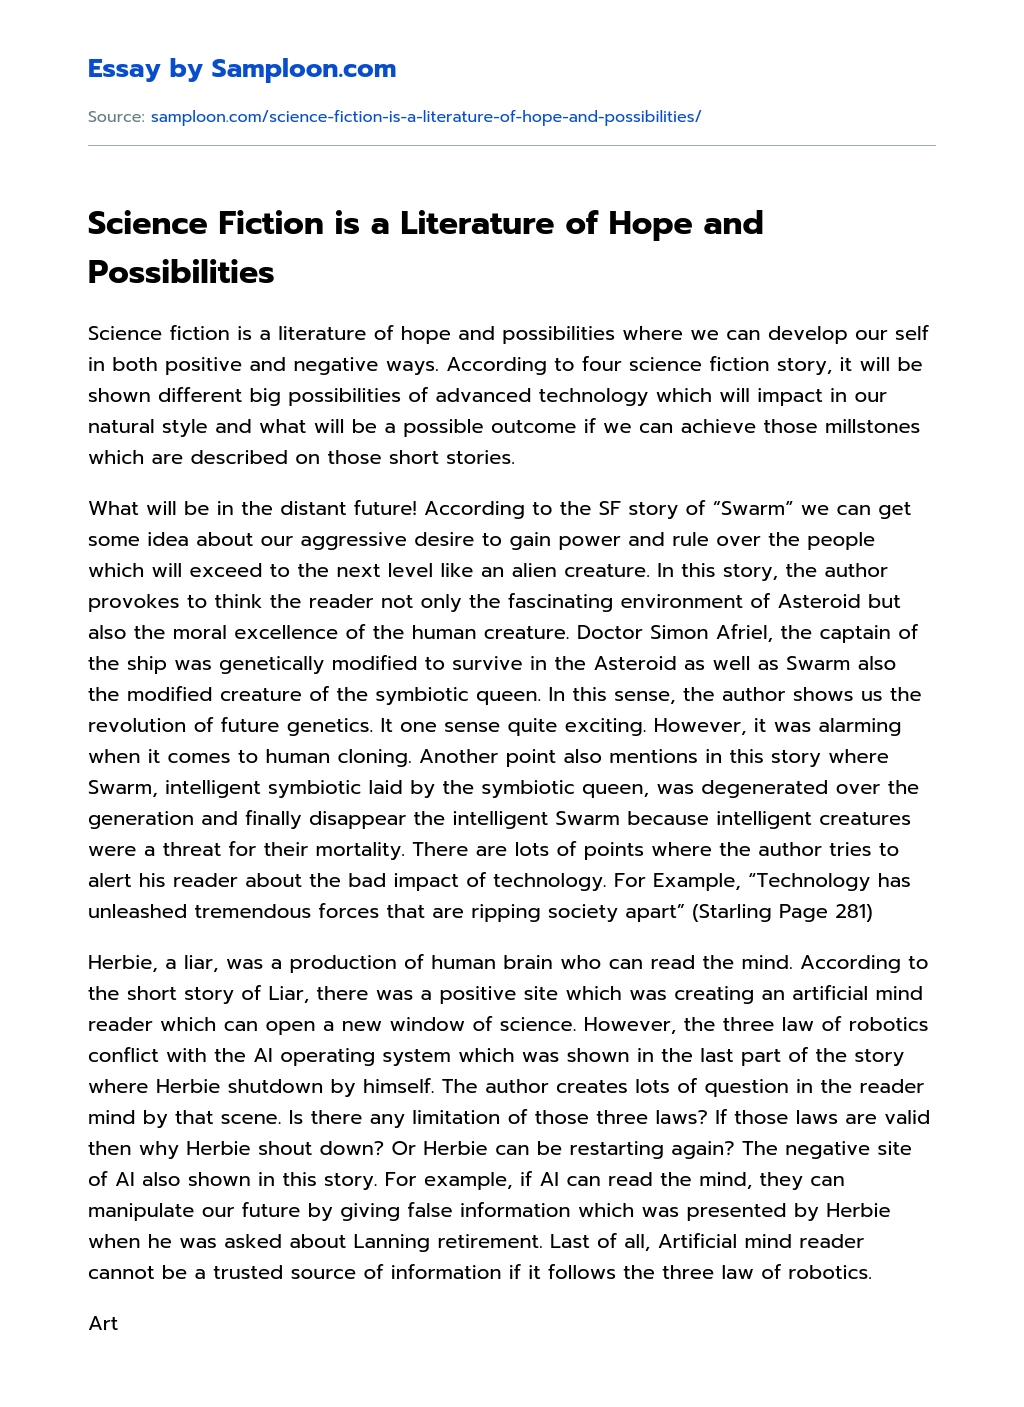 Science Fiction is a Literature of Hope and Possibilities essay